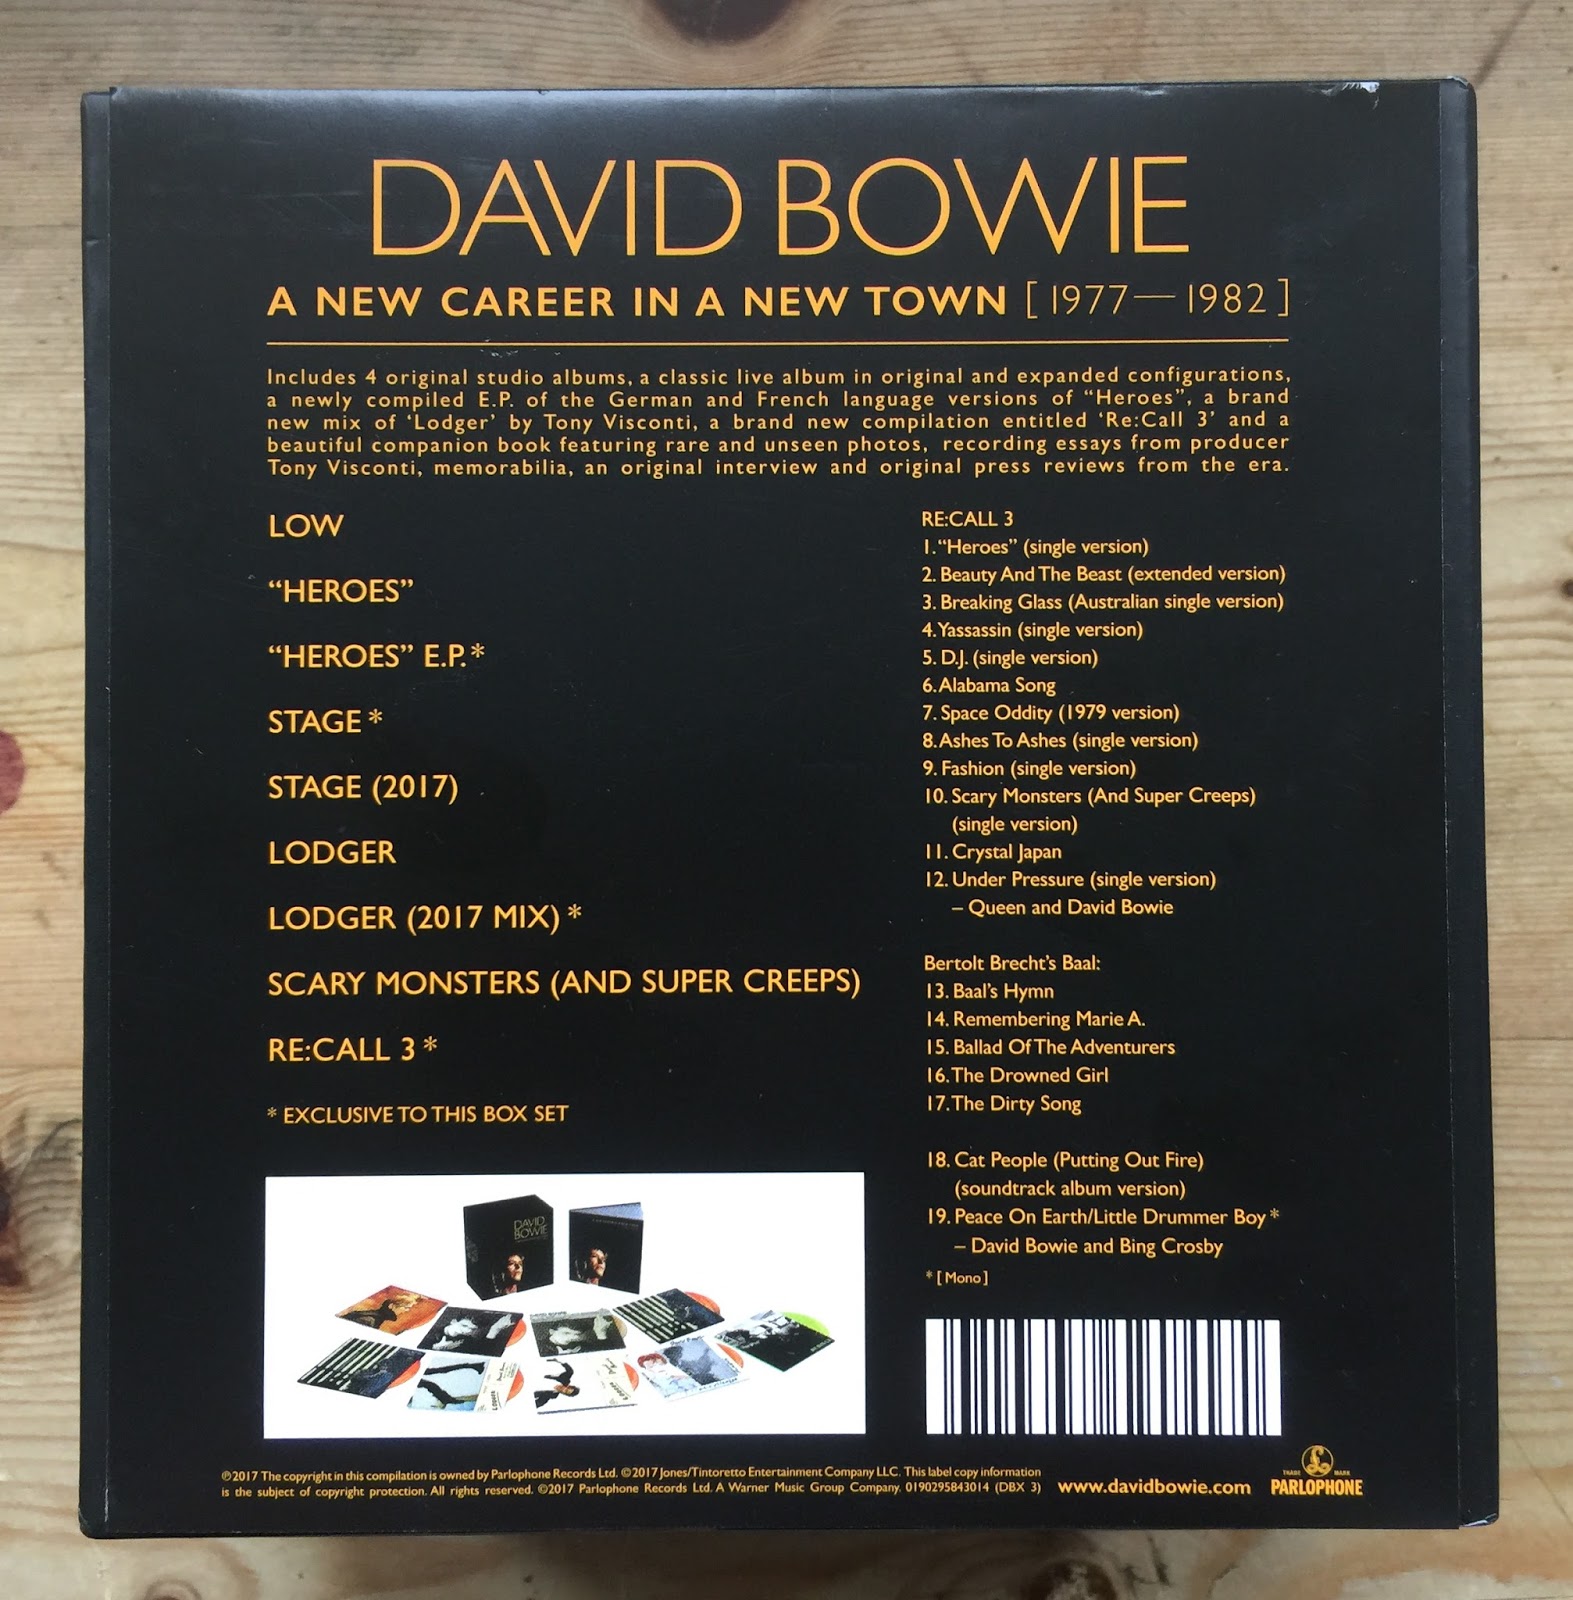 Sounds Good, Looks Good...: New Career In A New Town [1977 - 1982]" by DAVID BOWIE (September 2017 Parlophone 11-CD Box Set - Ray Staff and Tony Visconti Remasters) - A by Mark Barry...